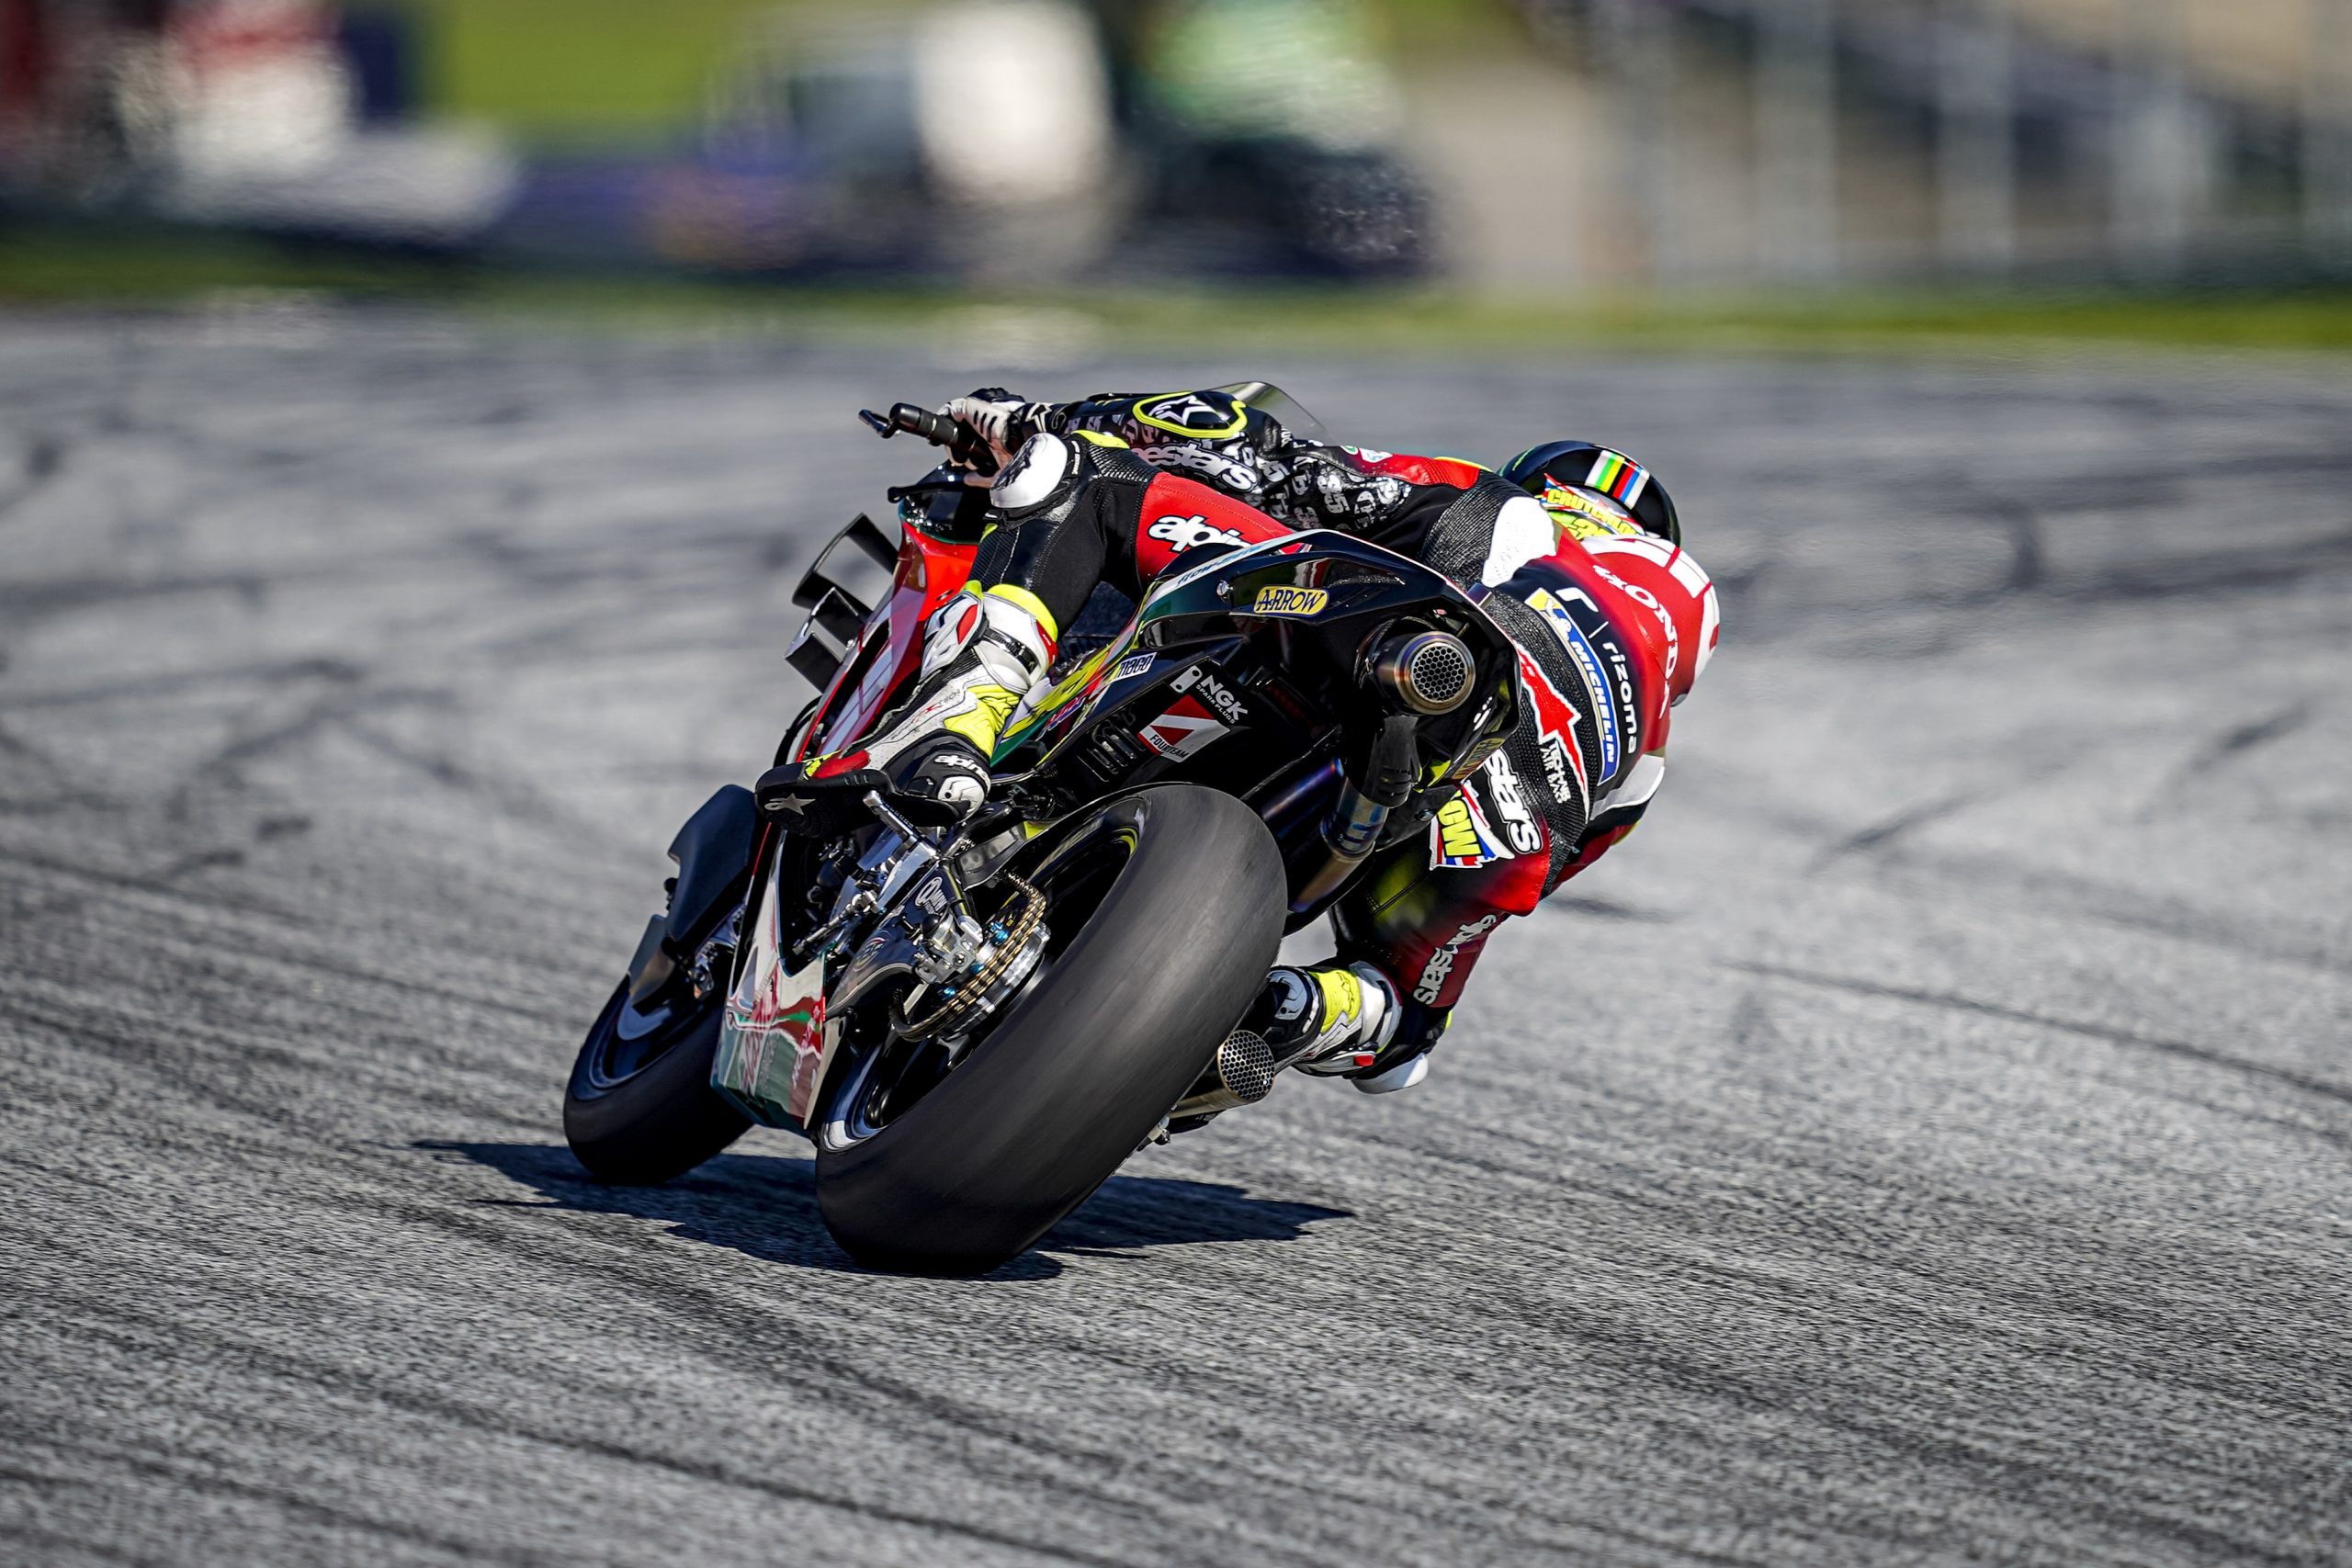 Sixth row for Crutchlow in Spielberg